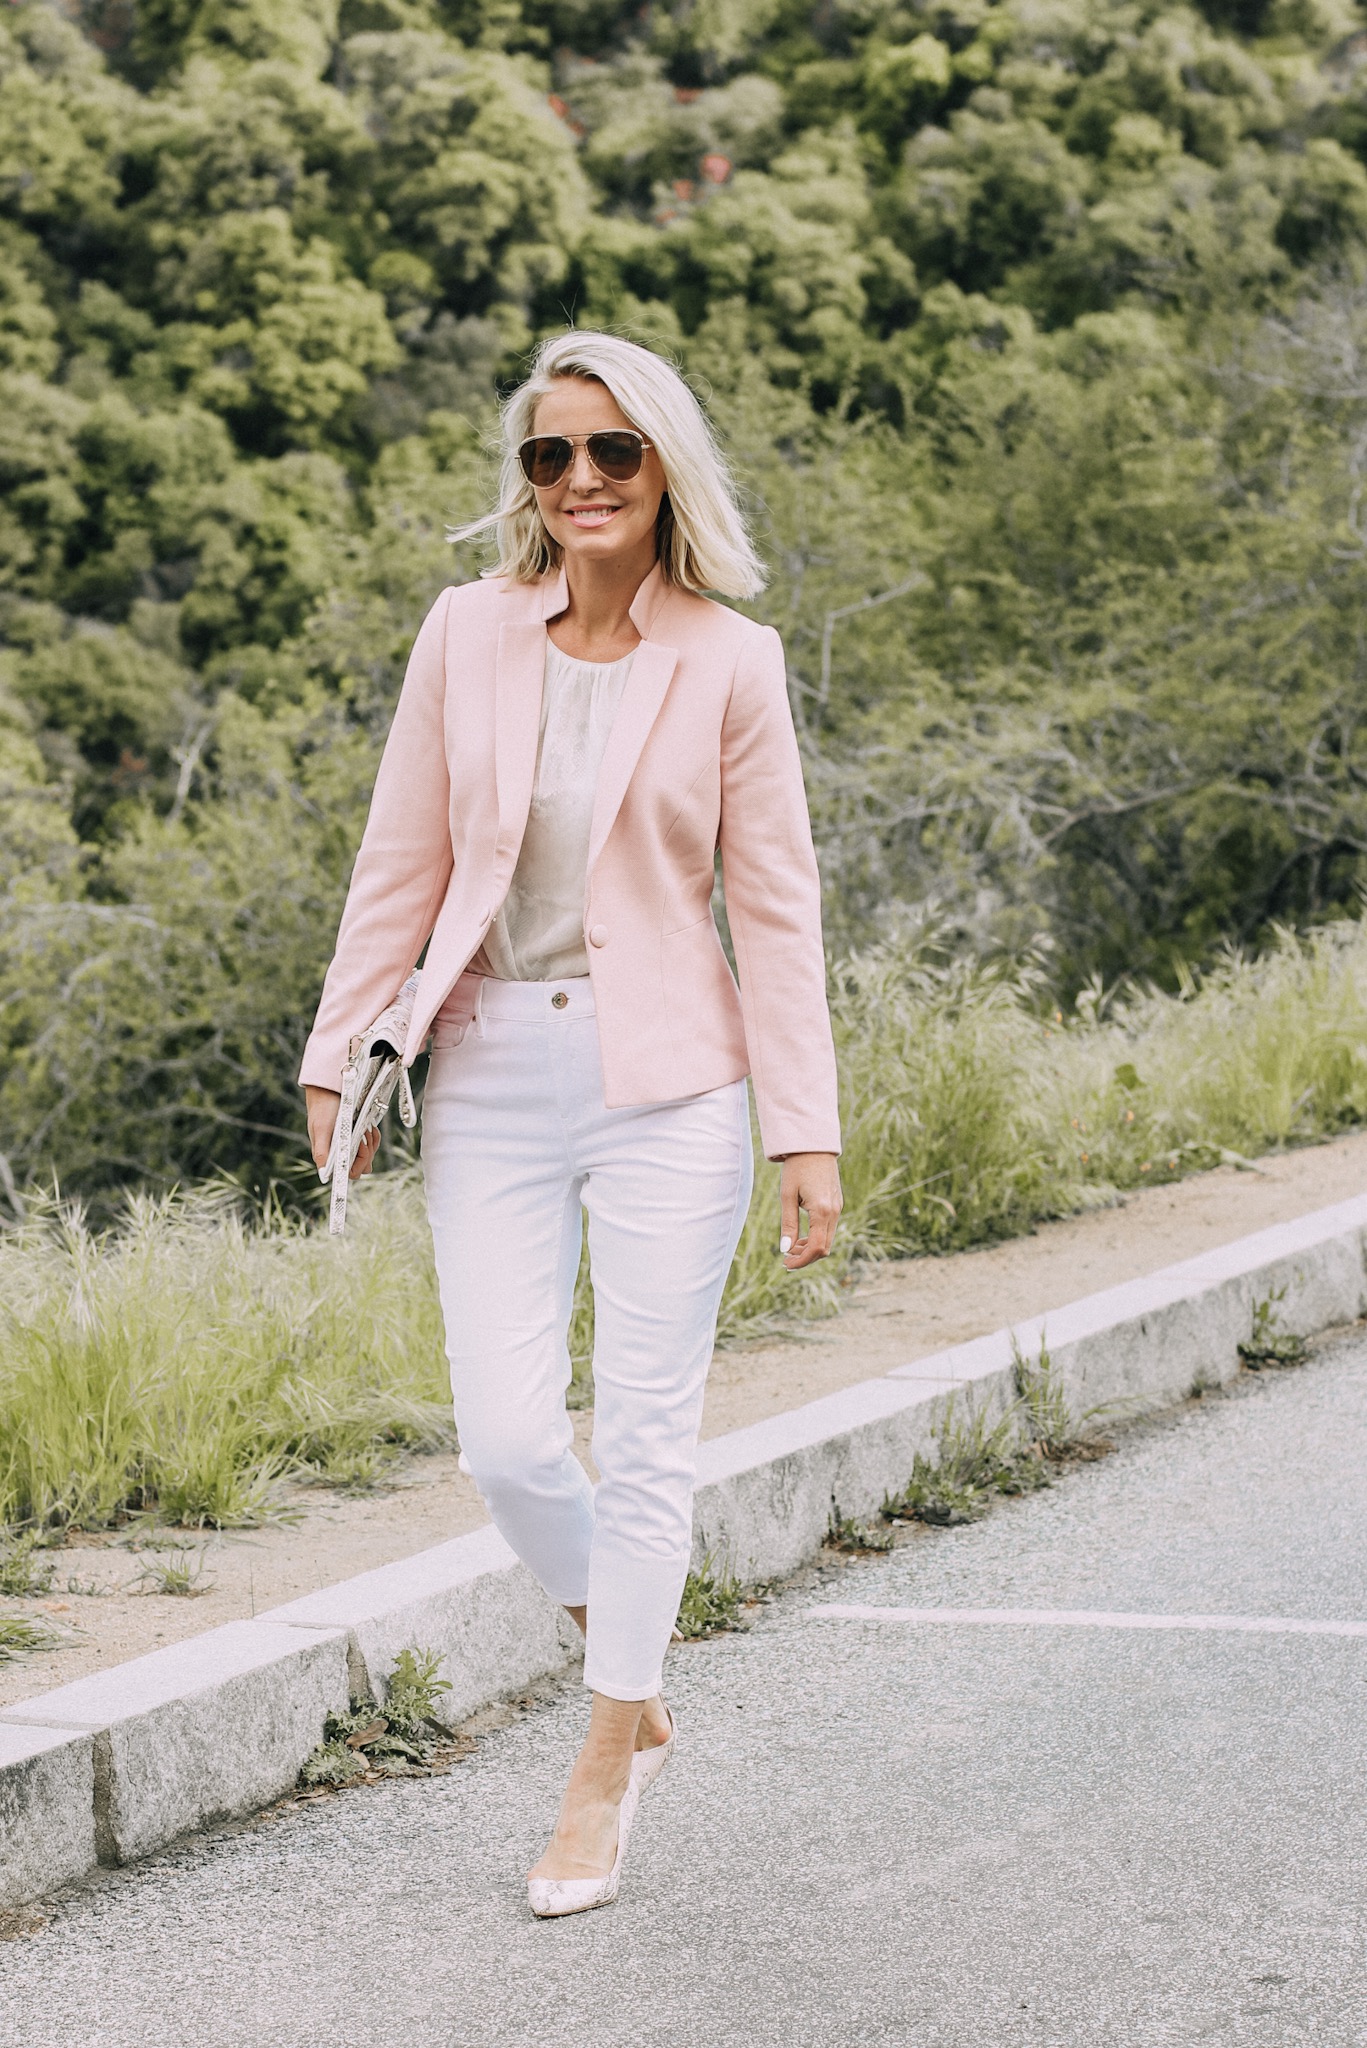 Spring Office Outfits, Fashion blogger Erin Busbee of BusbeeStyle.com wearing a blazer with a snake print shell and white cropped jeans, with pink snake print heels and clutch from White House Black Market in Sequoia National Park